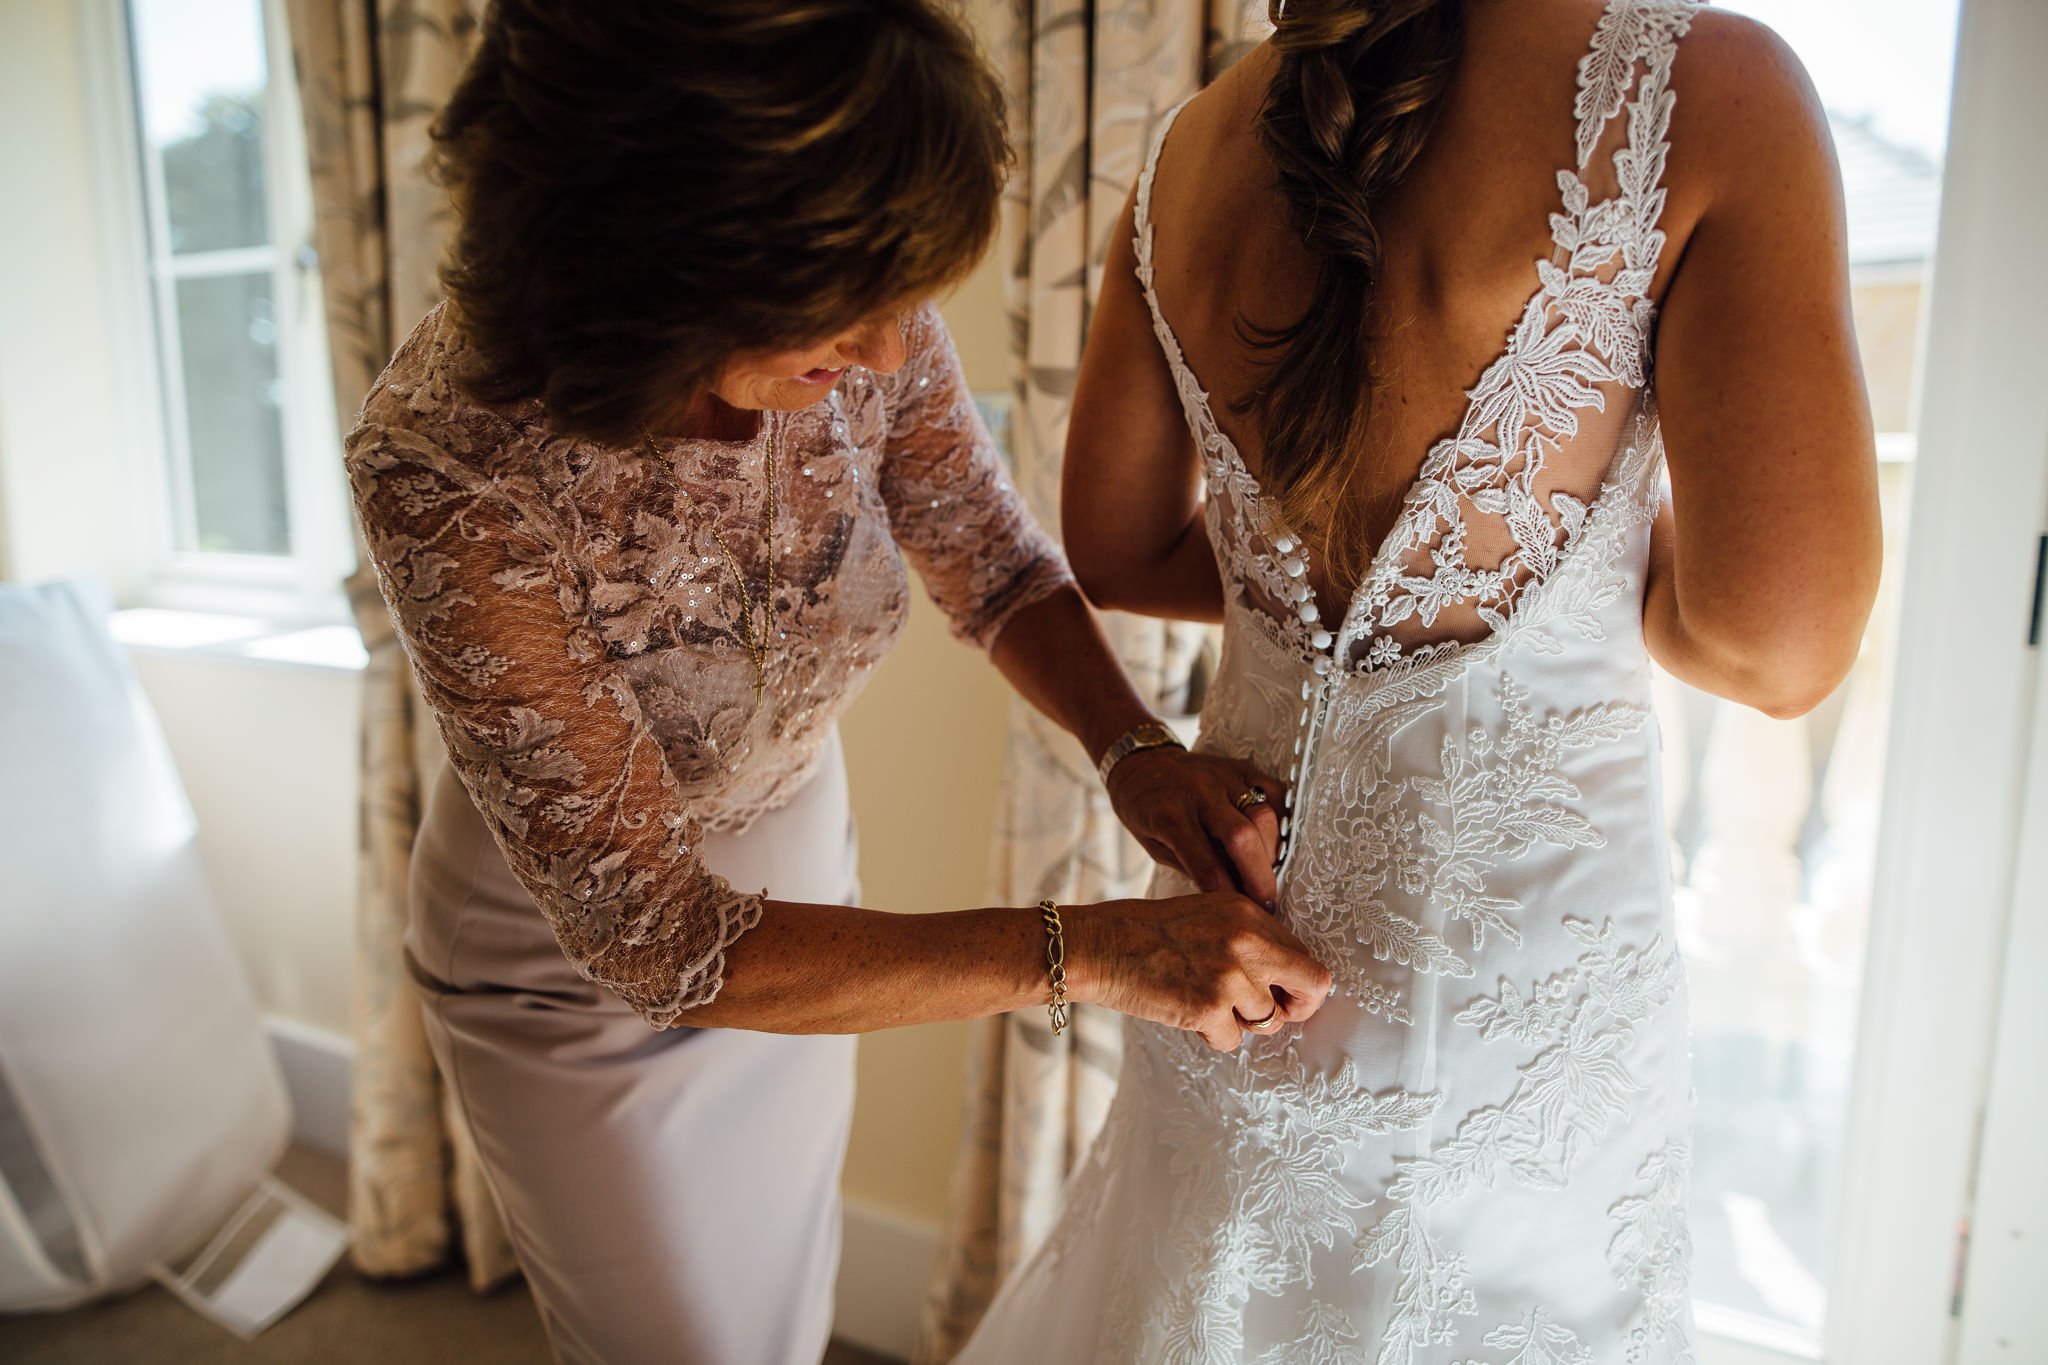  Mother of the Bride helps the Bride button up her dress on her wedding day 